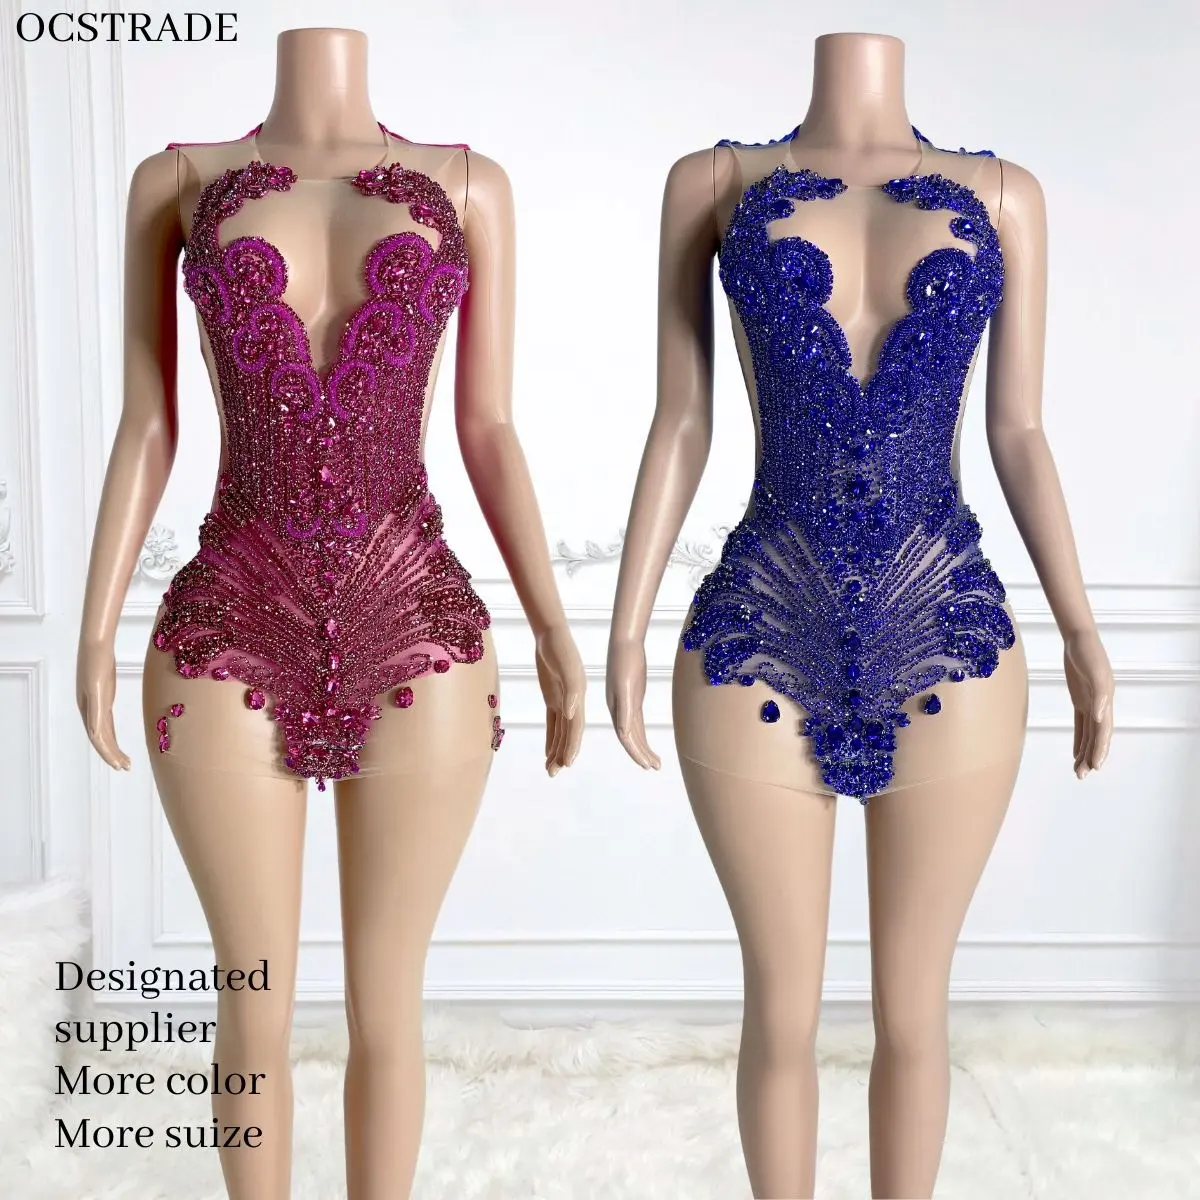 Ocstrade Luxe Rose Cristal Tissu Maille Strass Robe De Bal Rese Rouge Sans Manches Club Wear Corset Mini Robe Avec Strass